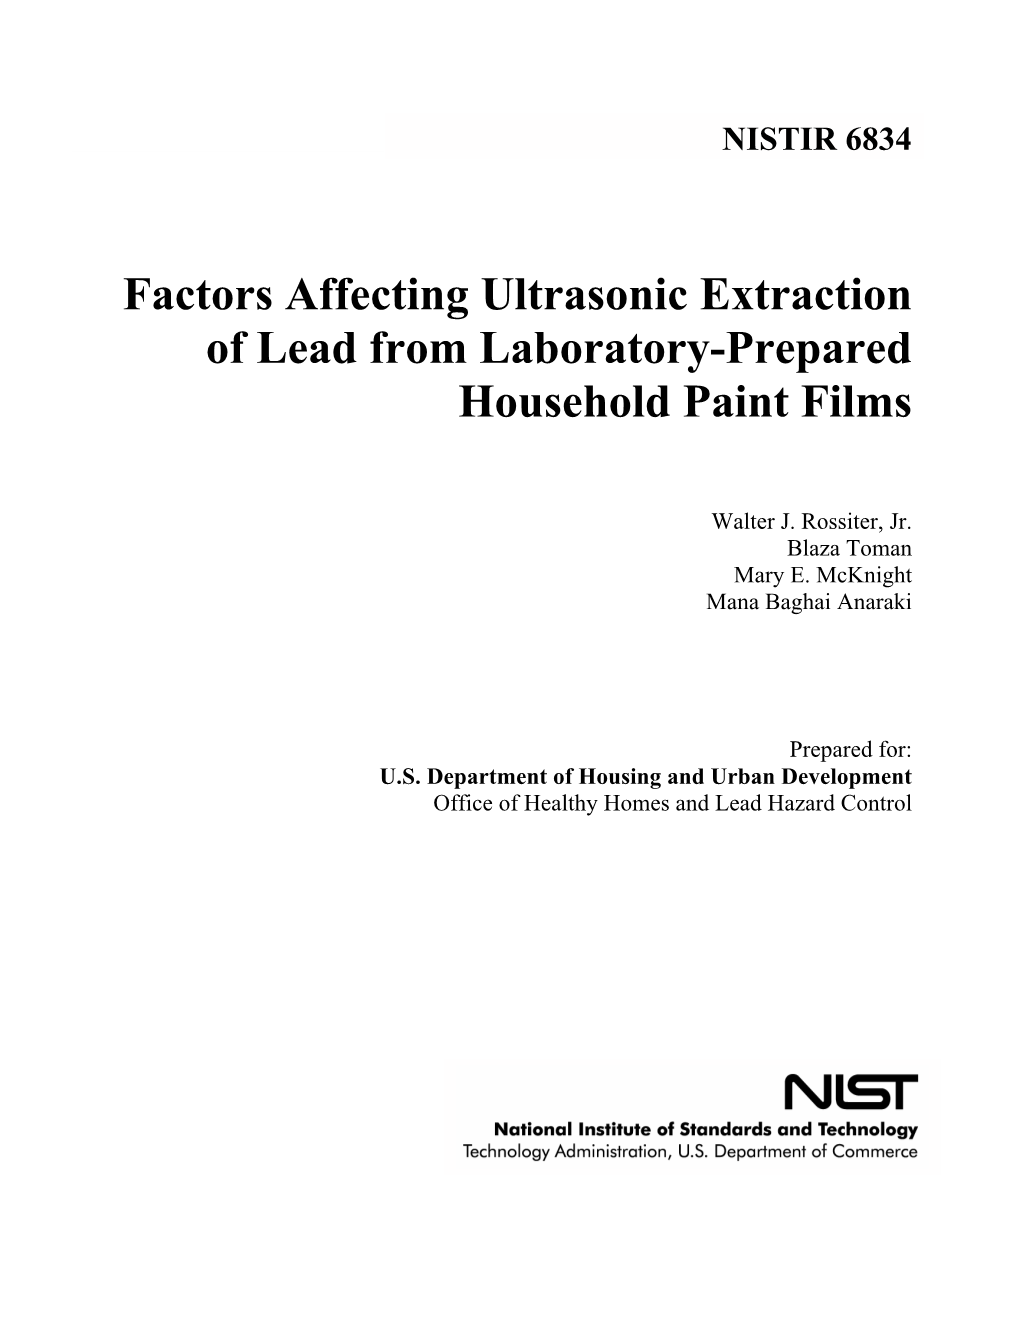 Factors Affecting Ultrasonic Extraction of Lead from Laboratory-Prepared Household Paint Films